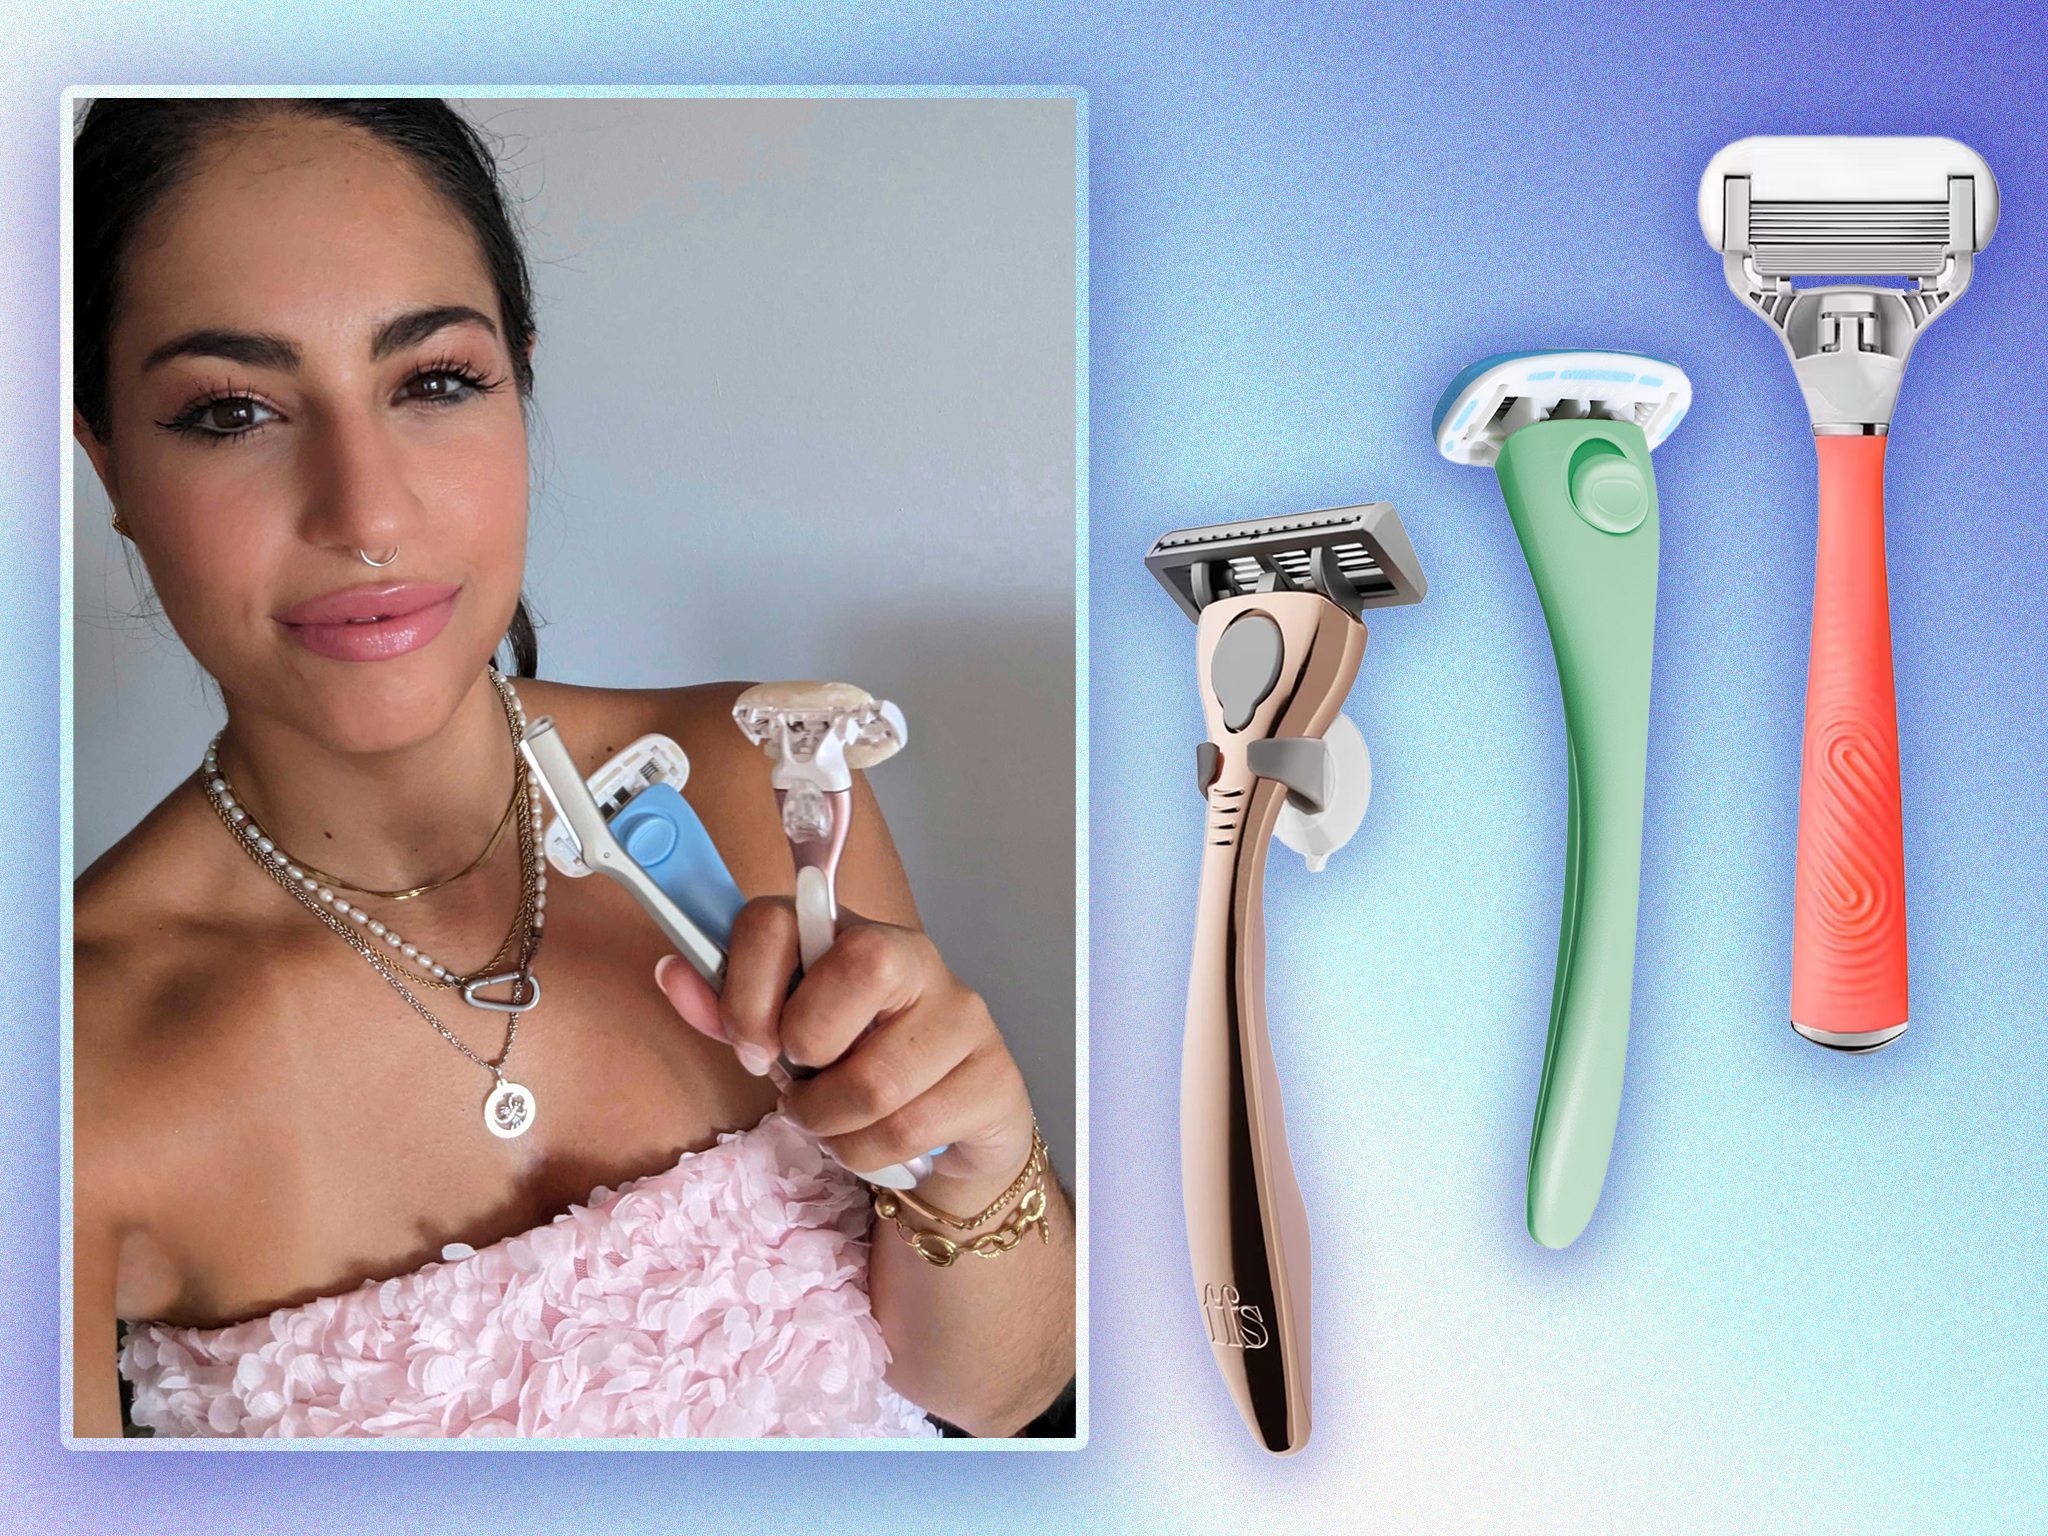 Buy Face Razor for Women Designed By Doctors | Be Bodywise